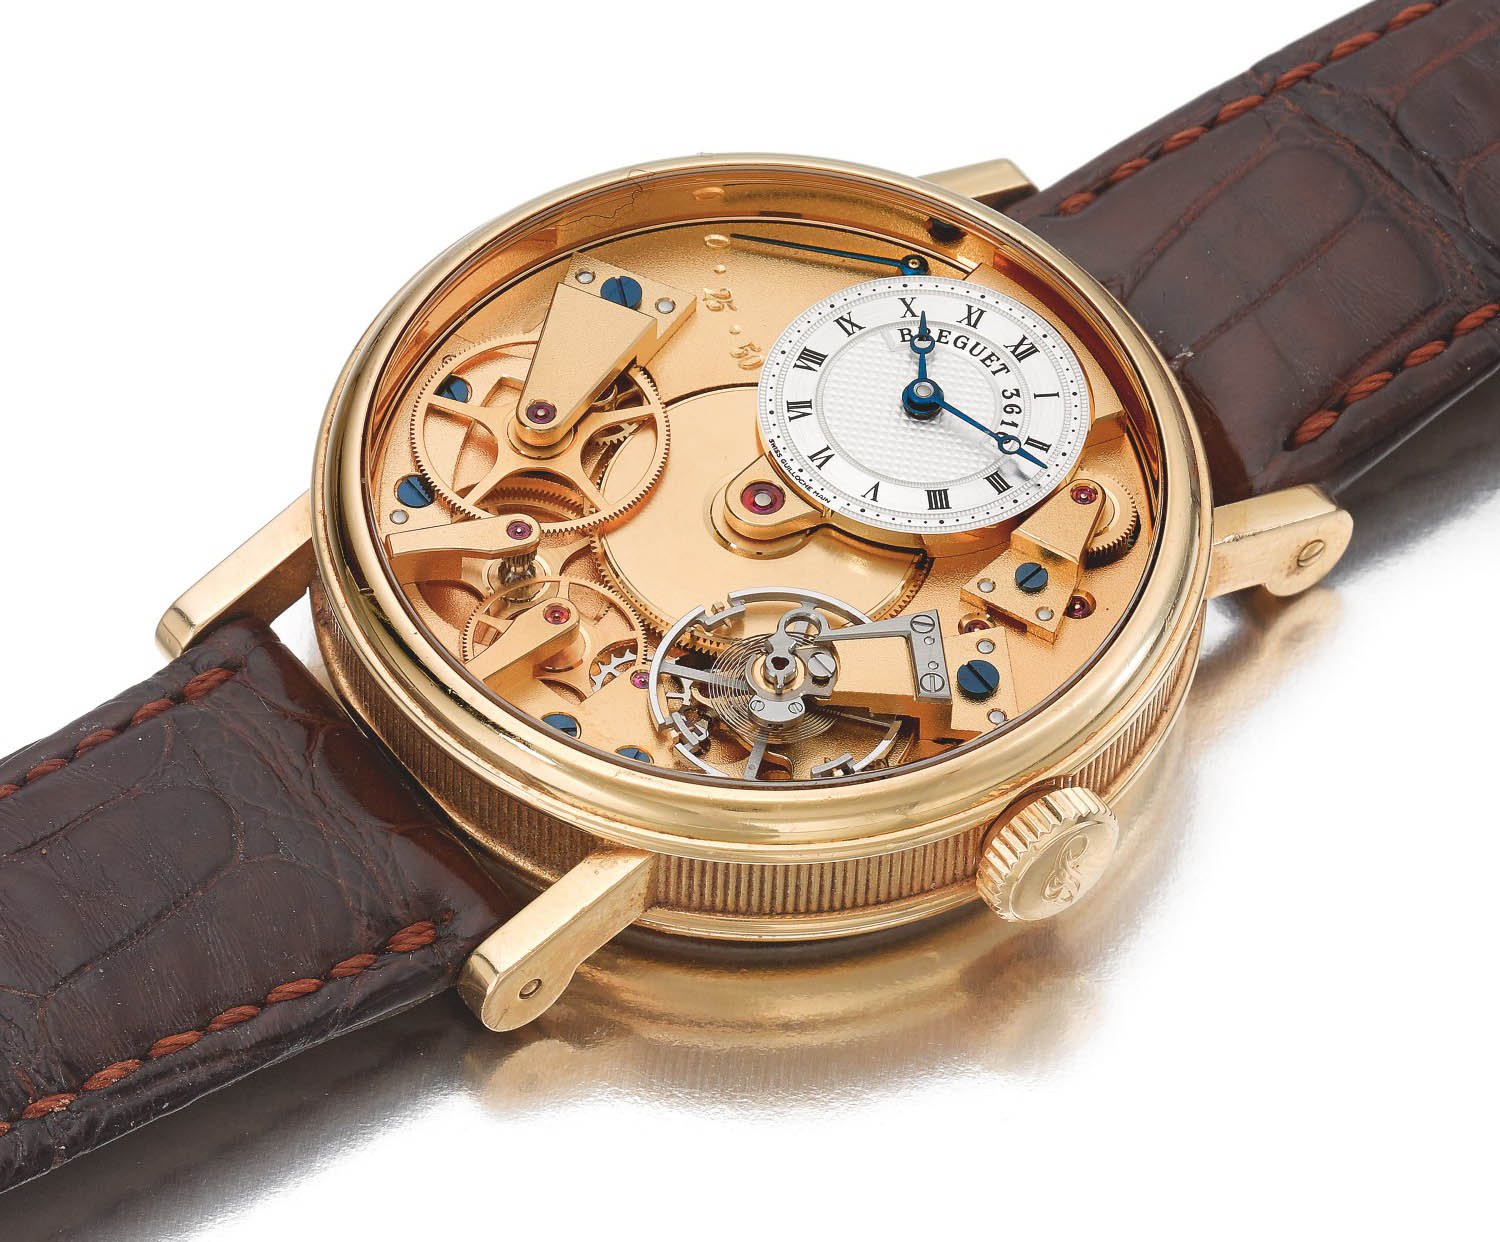 【F】 Saving Up For The Breguet Tradition In 2023